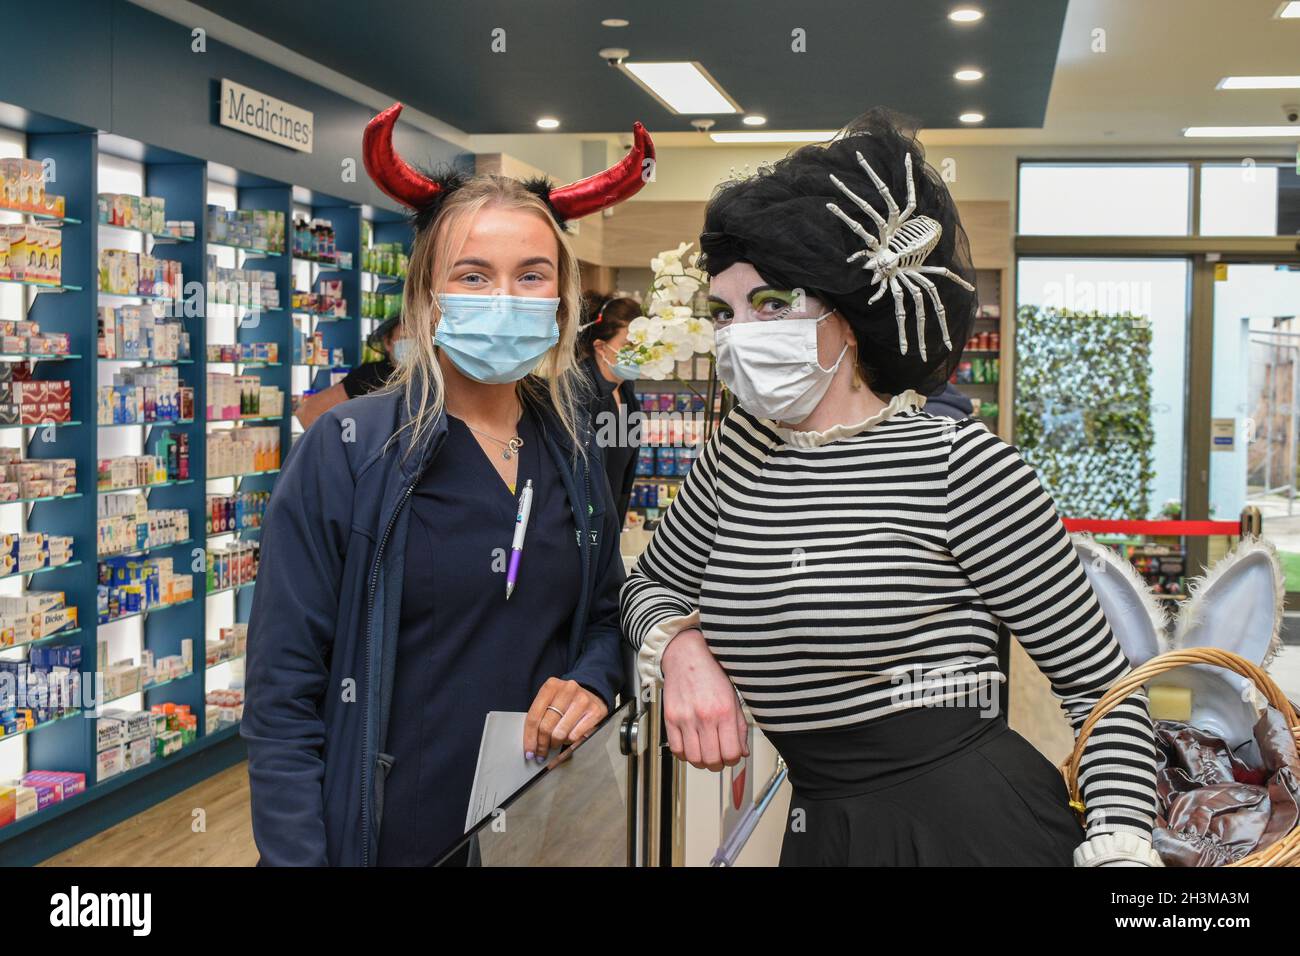 Bantry, West Cork, Ireland. 29th Oct, 2021. Last Friday, the Bantry Business Association hosted a Spooky Dress Up Day in Bantry. Credit: Karlis Dzjamko/Alamy Live News Stock Photo